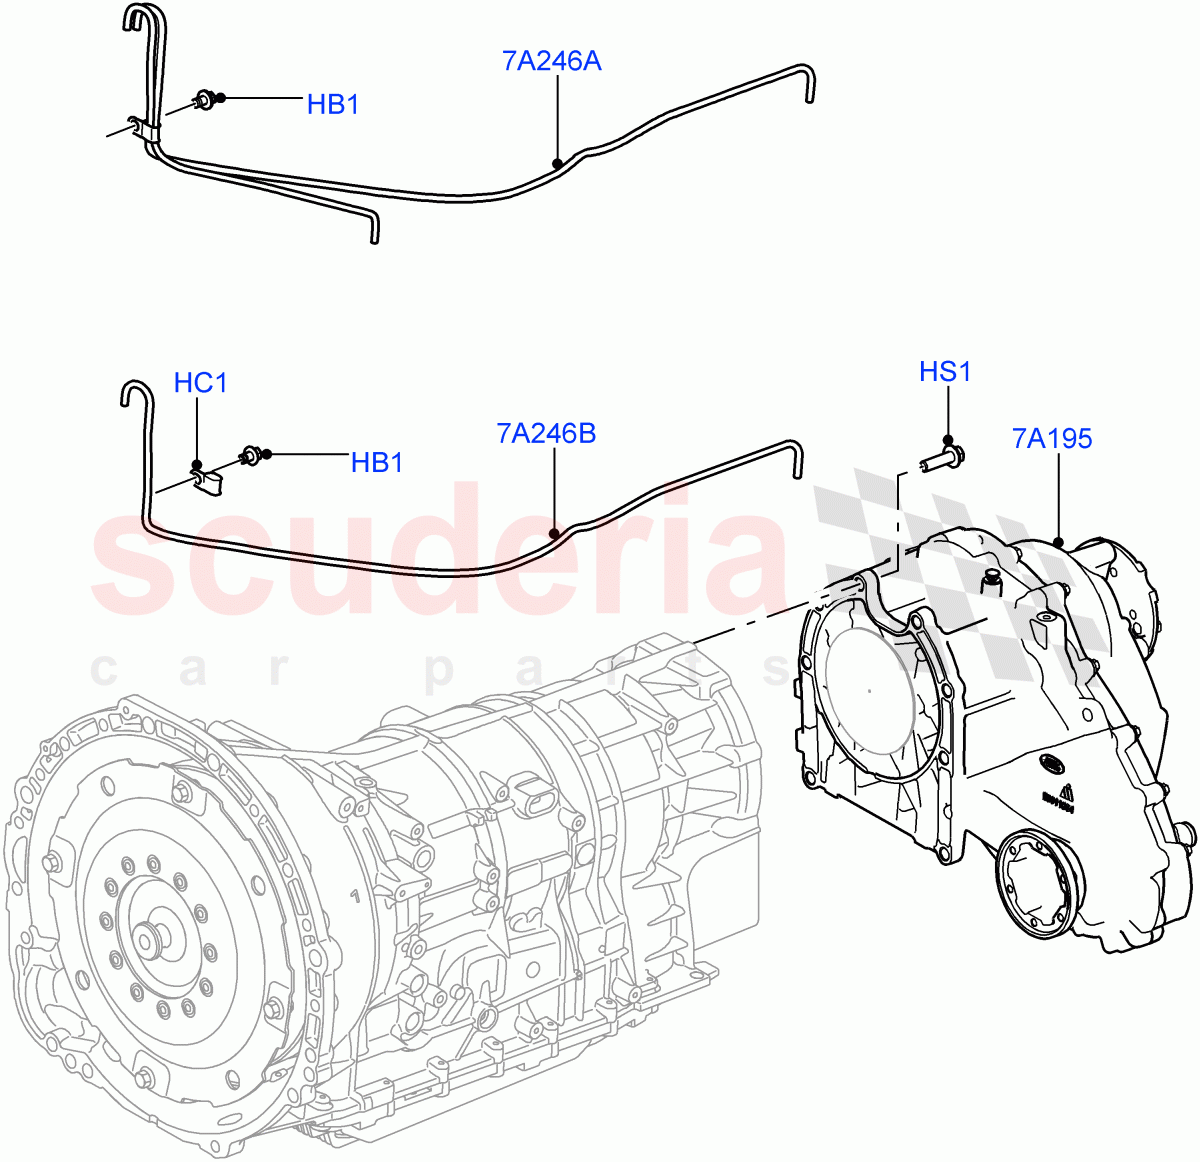 Transfer Drive Case(8 Speed Auto Trans ZF 8HP70 4WD,With 1 Speed Transfer Case,8 Speed Auto Trans ZF 8HP45)((V)FROMEA000001,(V)TOGA999999) of Land Rover Land Rover Range Rover (2012-2021) [3.0 I6 Turbo Diesel AJ20D6]